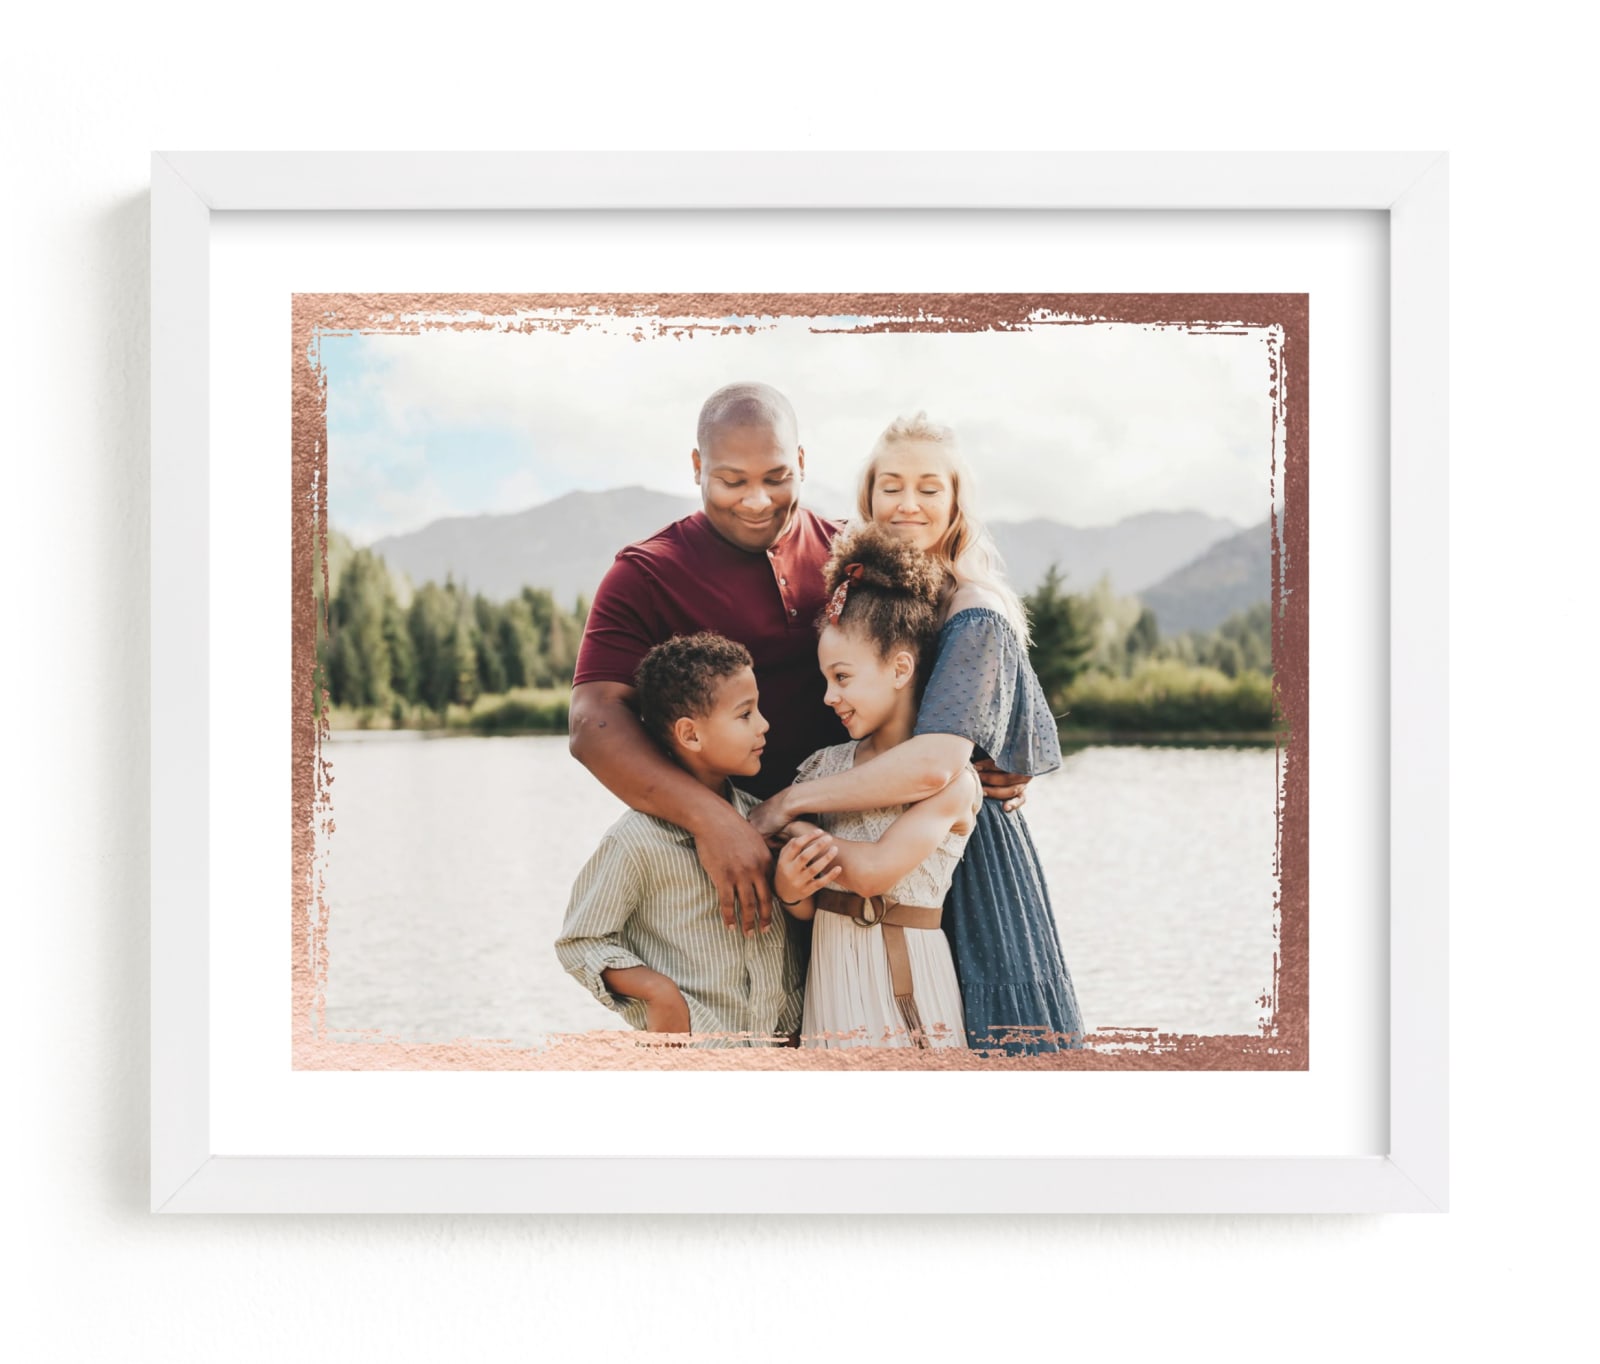 This is a rosegold foil stamped photo art by cambria called Rustic Frame.